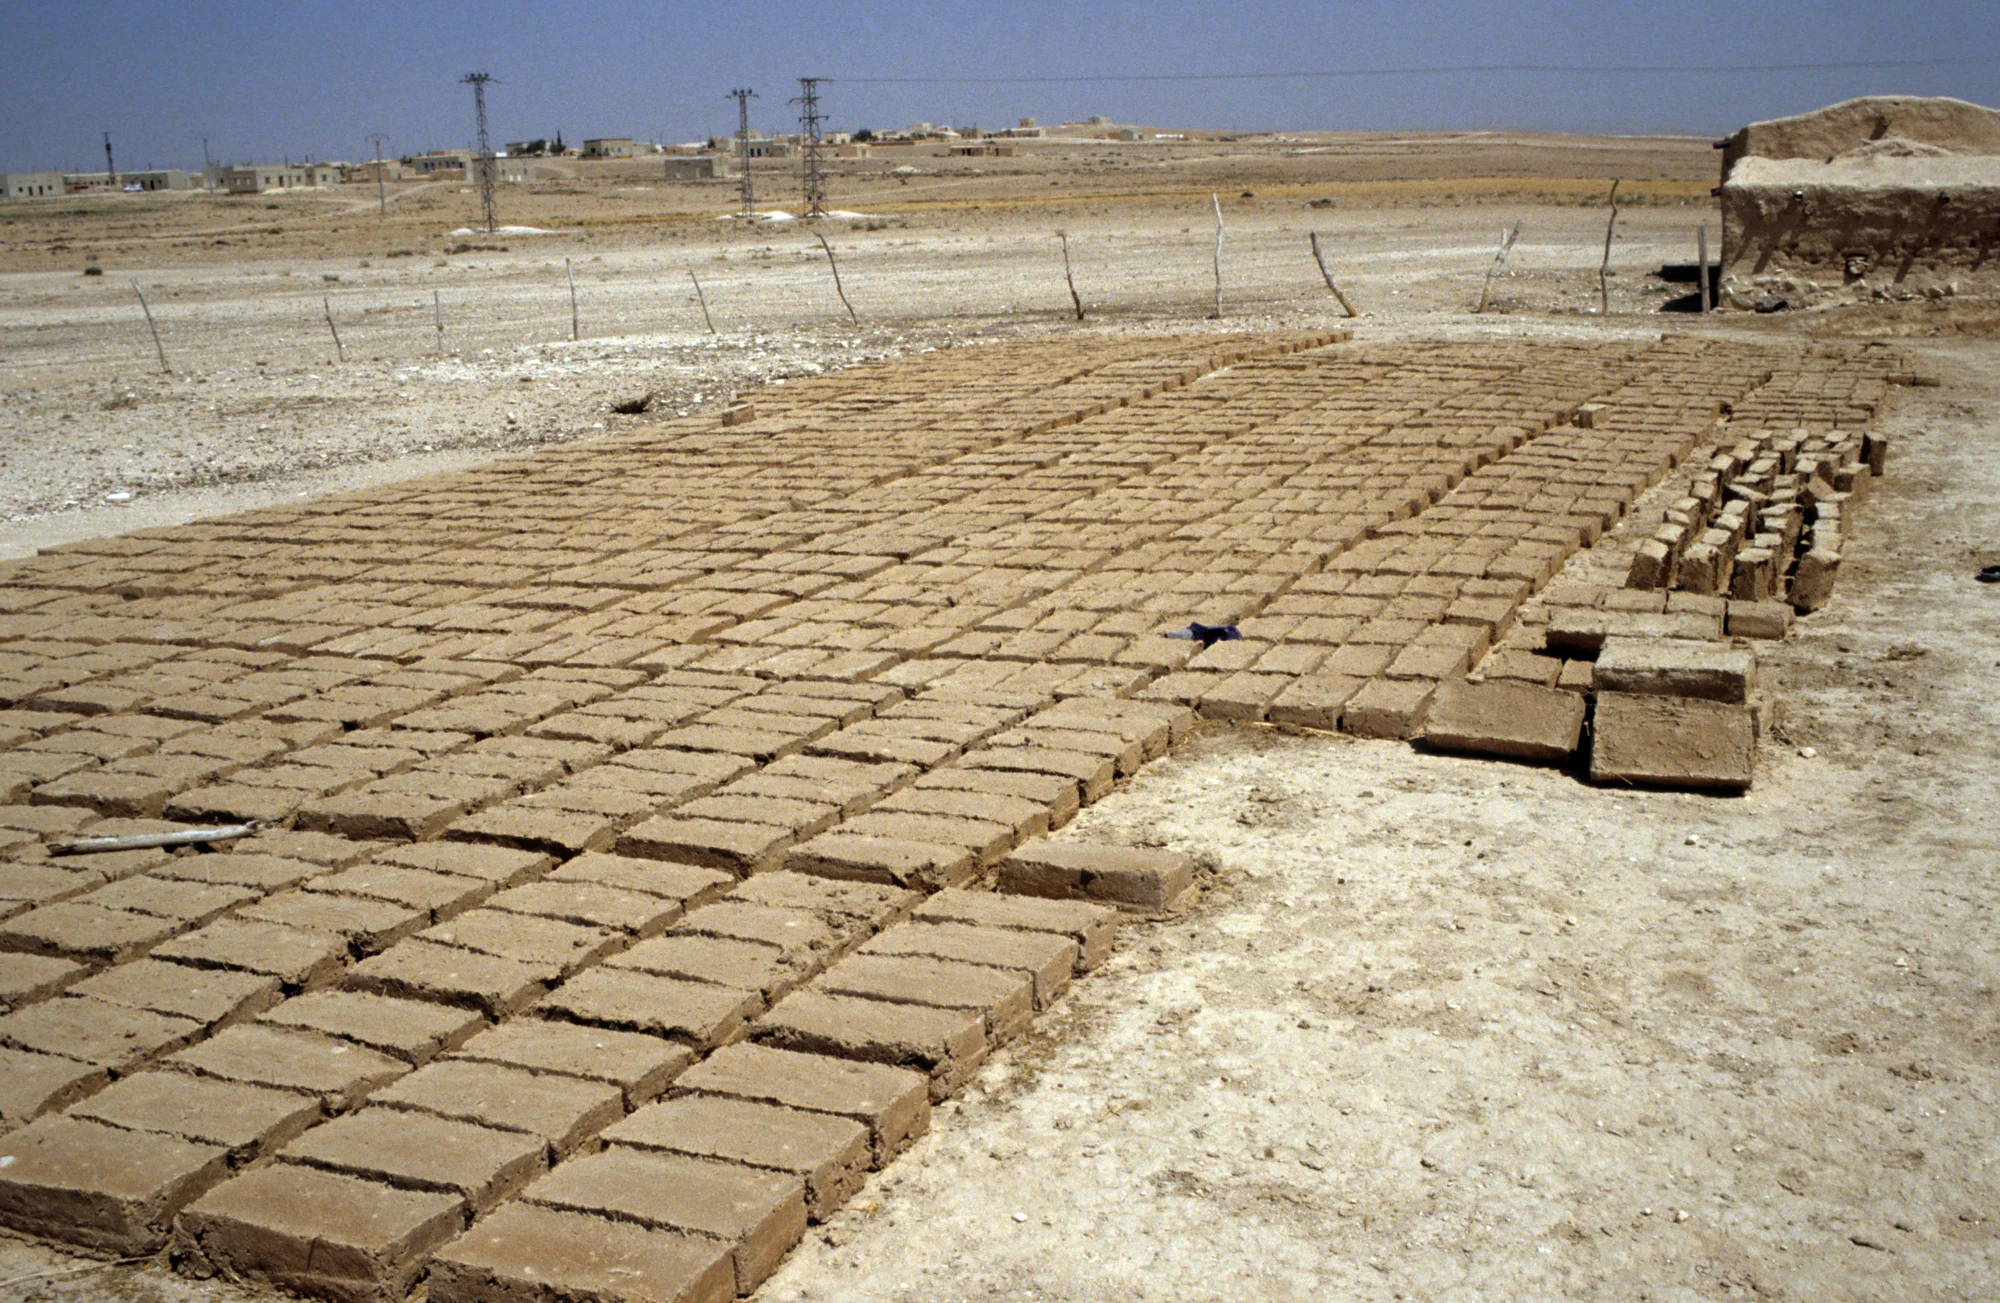 Habuba Kabira, clay bricks are drying - at the edge of the village, because there is enough space